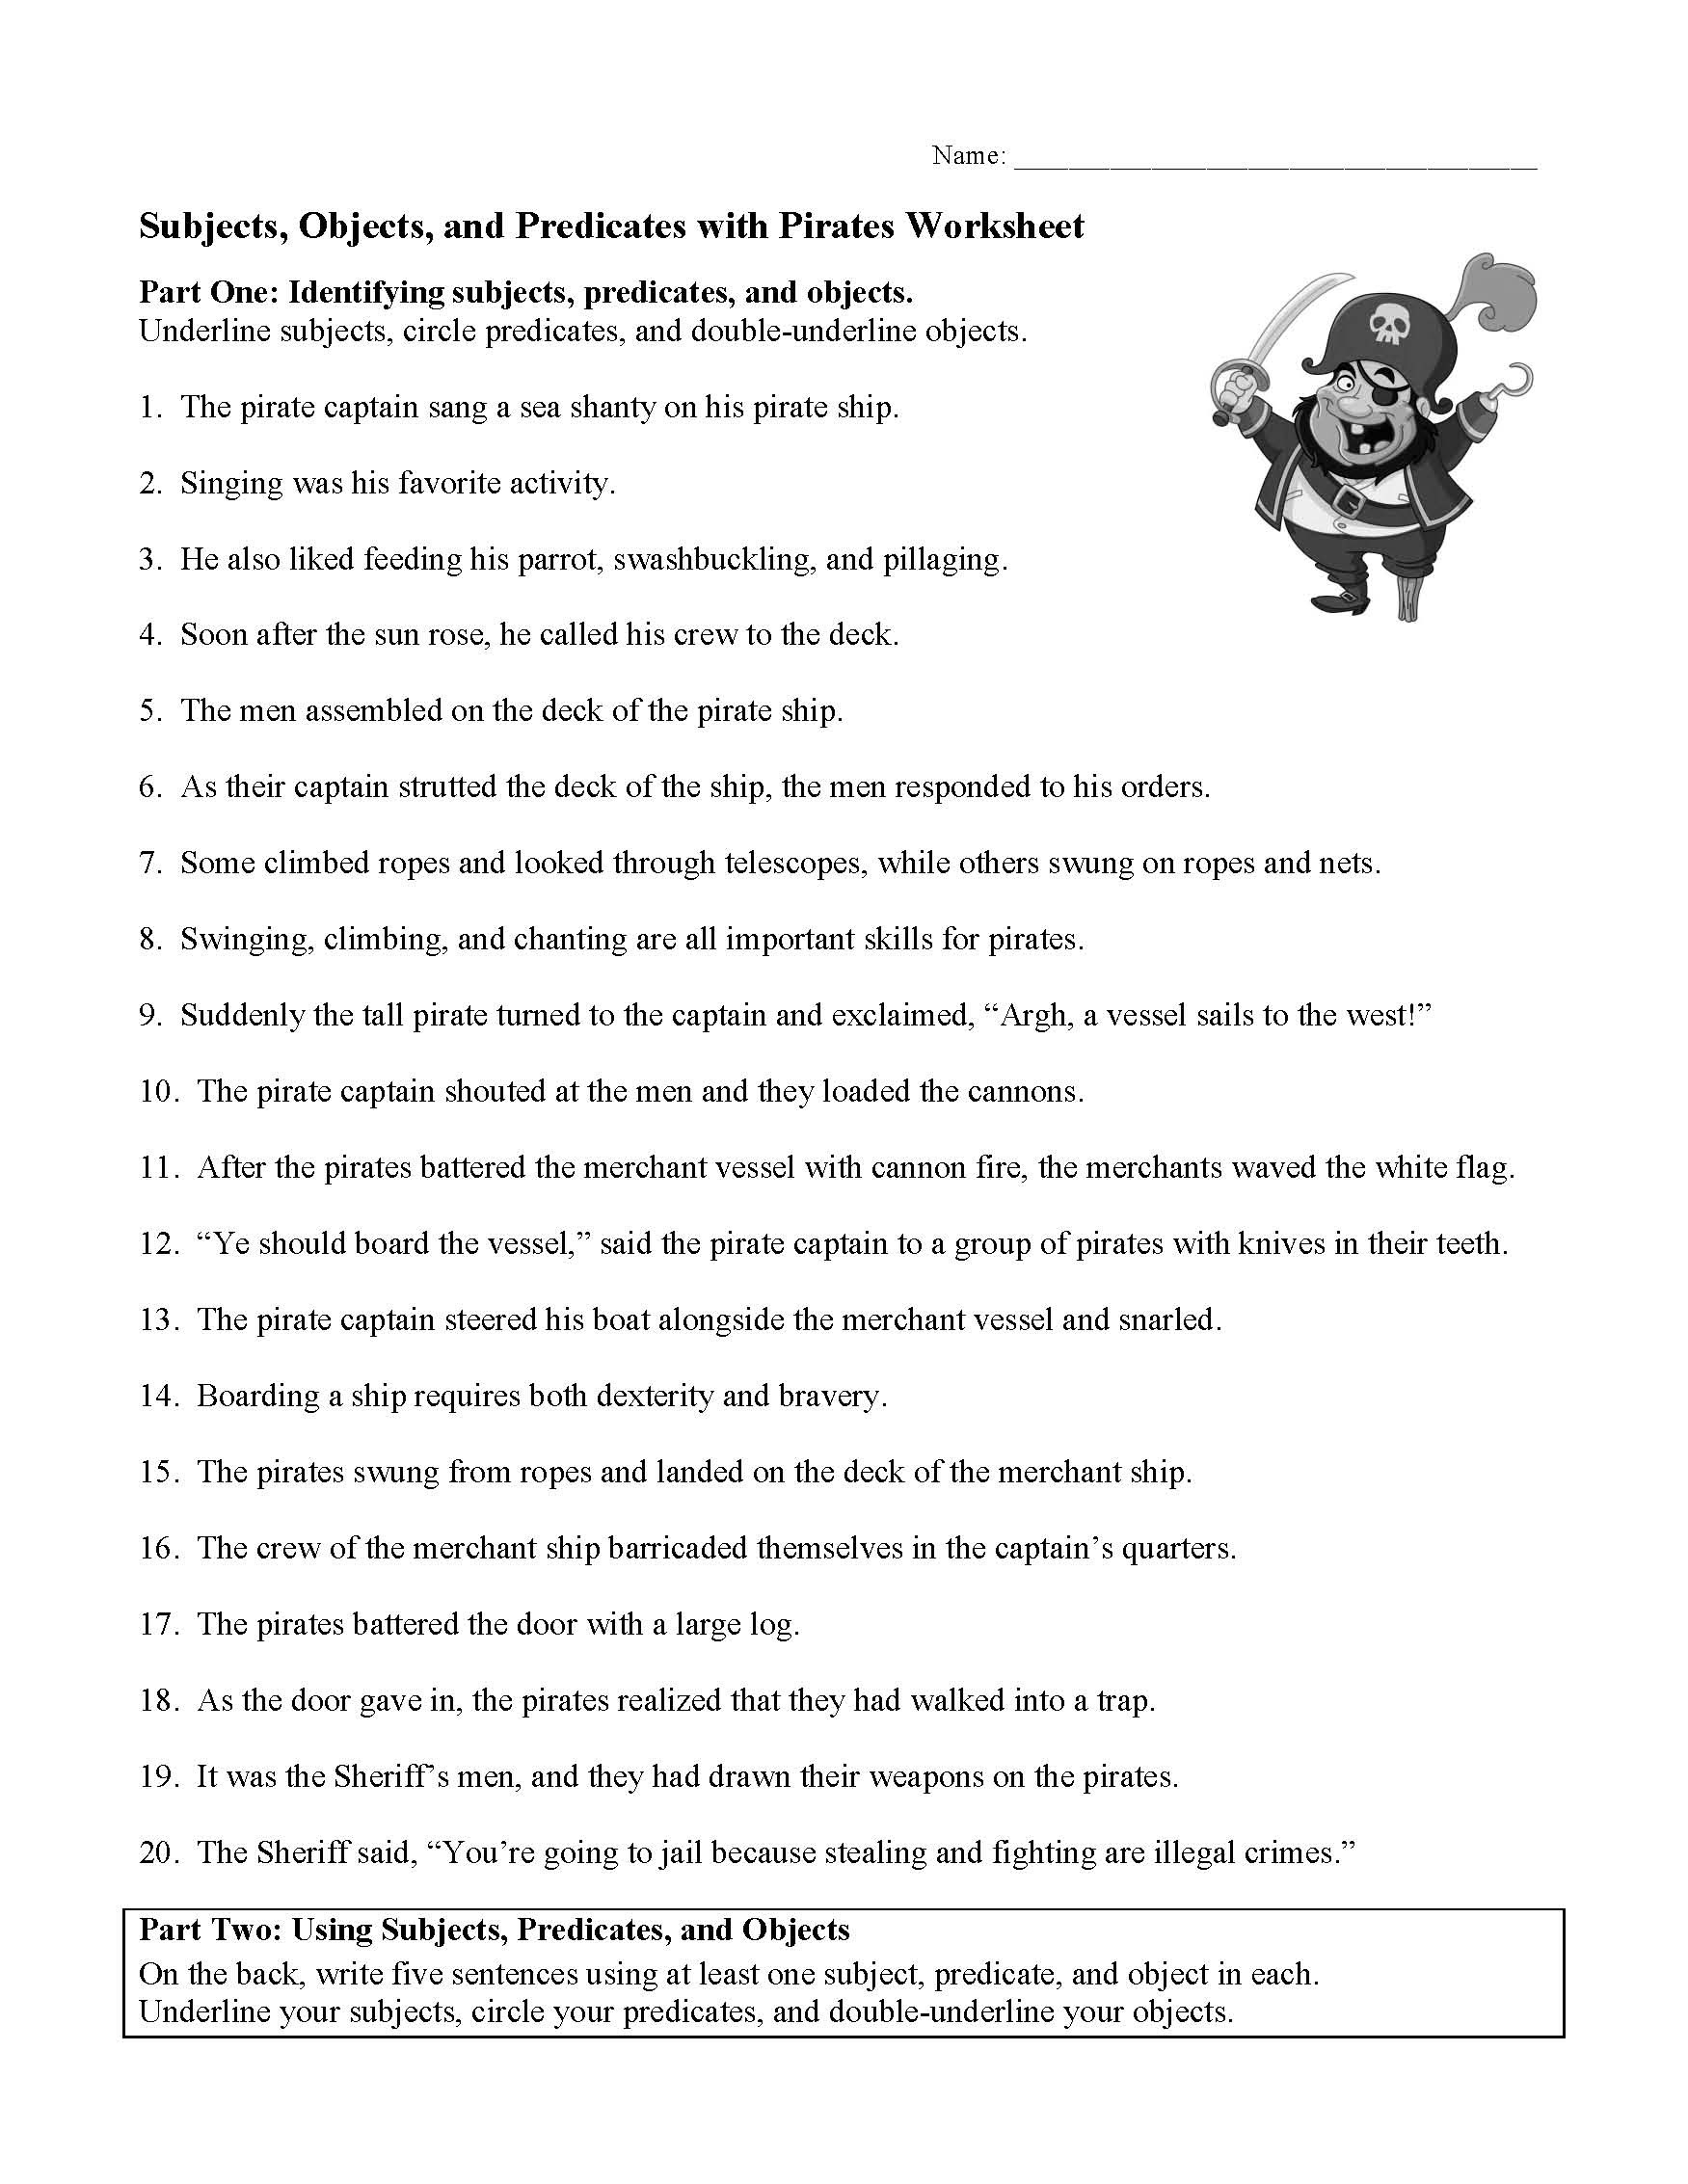 Subjects Objects And Predicates With Pirates Worksheet